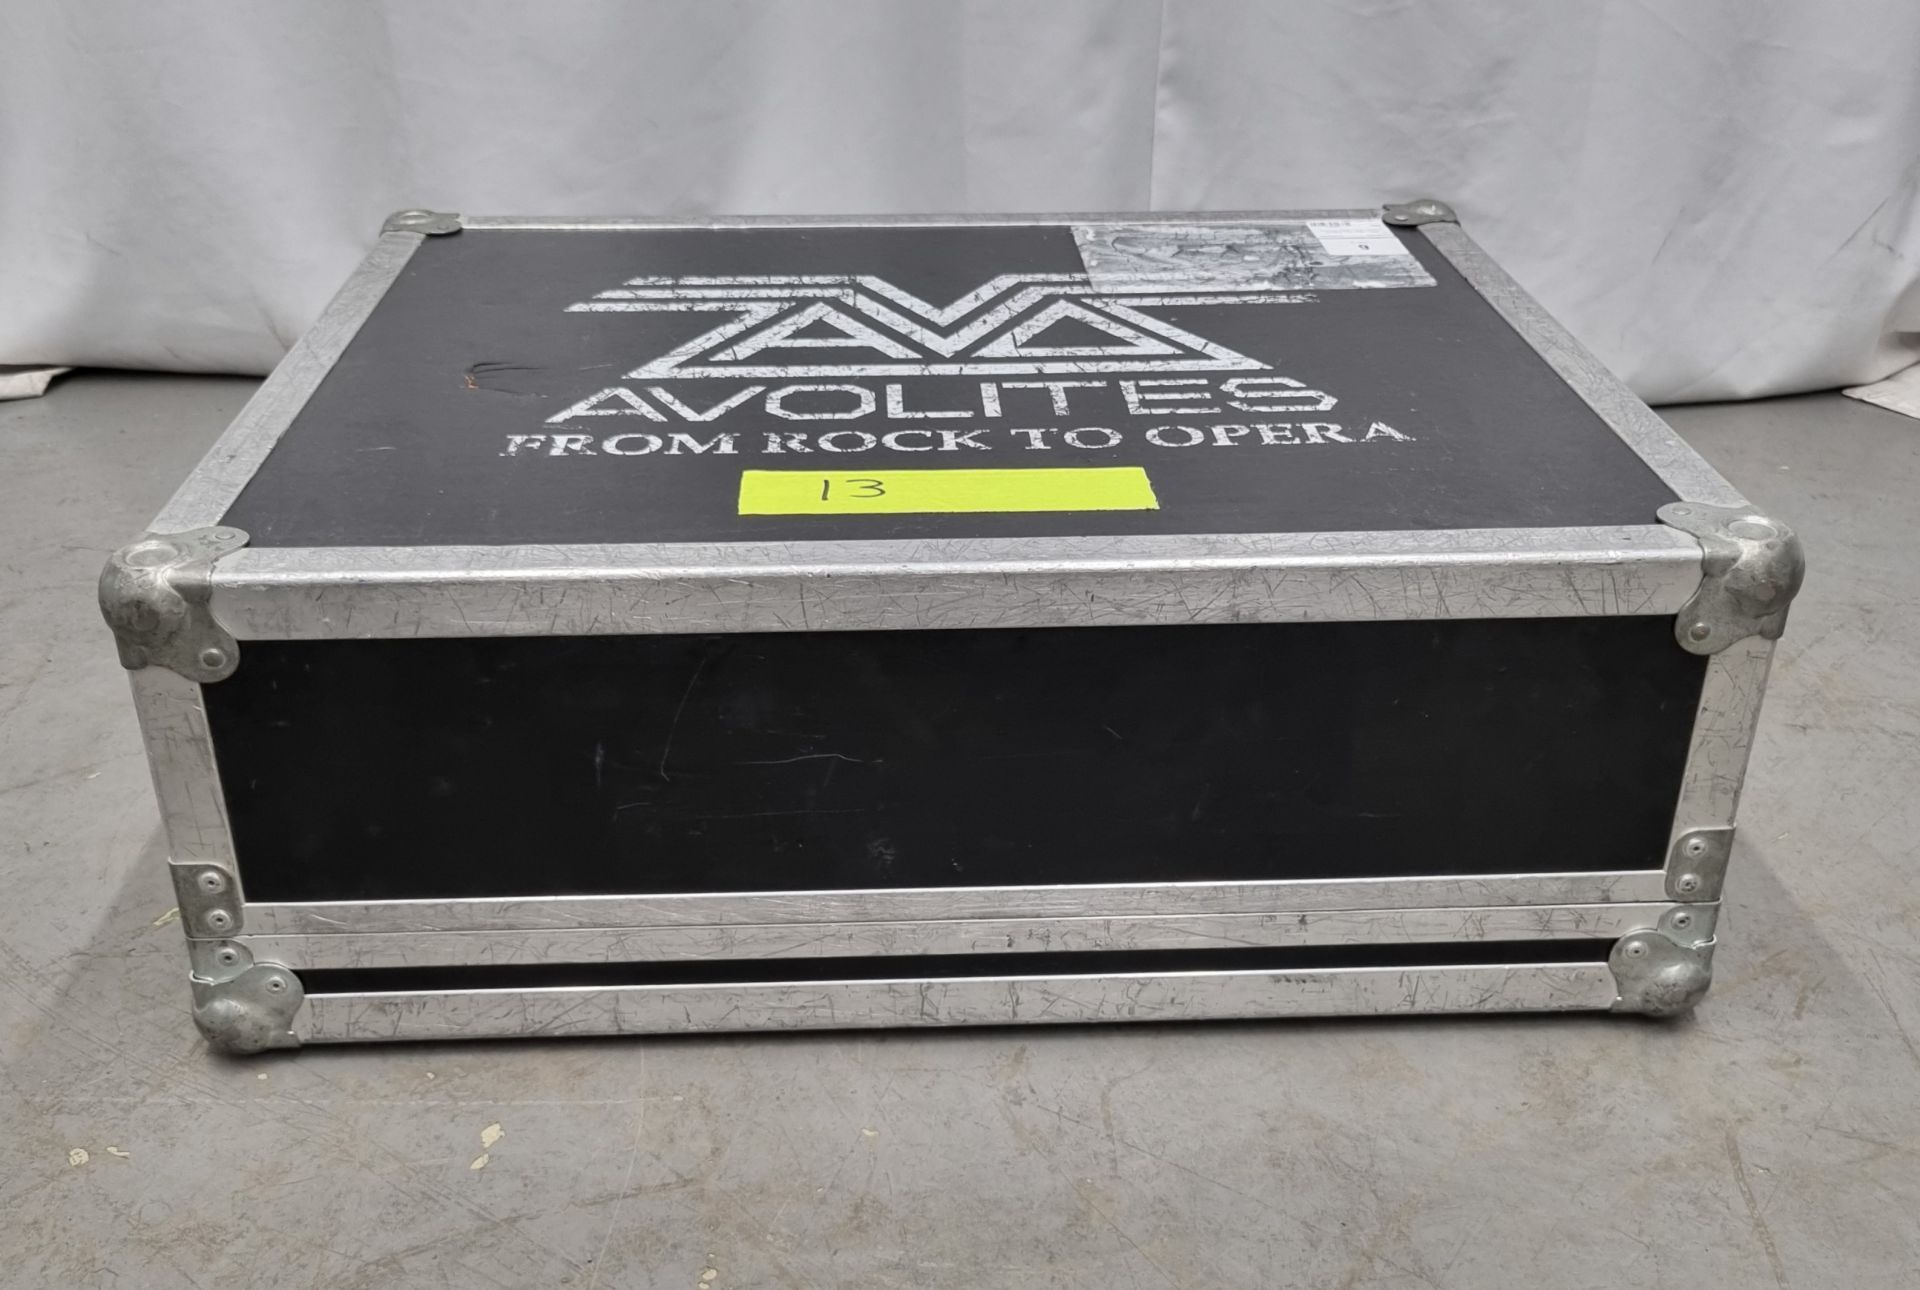 Avolites Pearl Tiger lighting console with flight case - Image 12 of 12